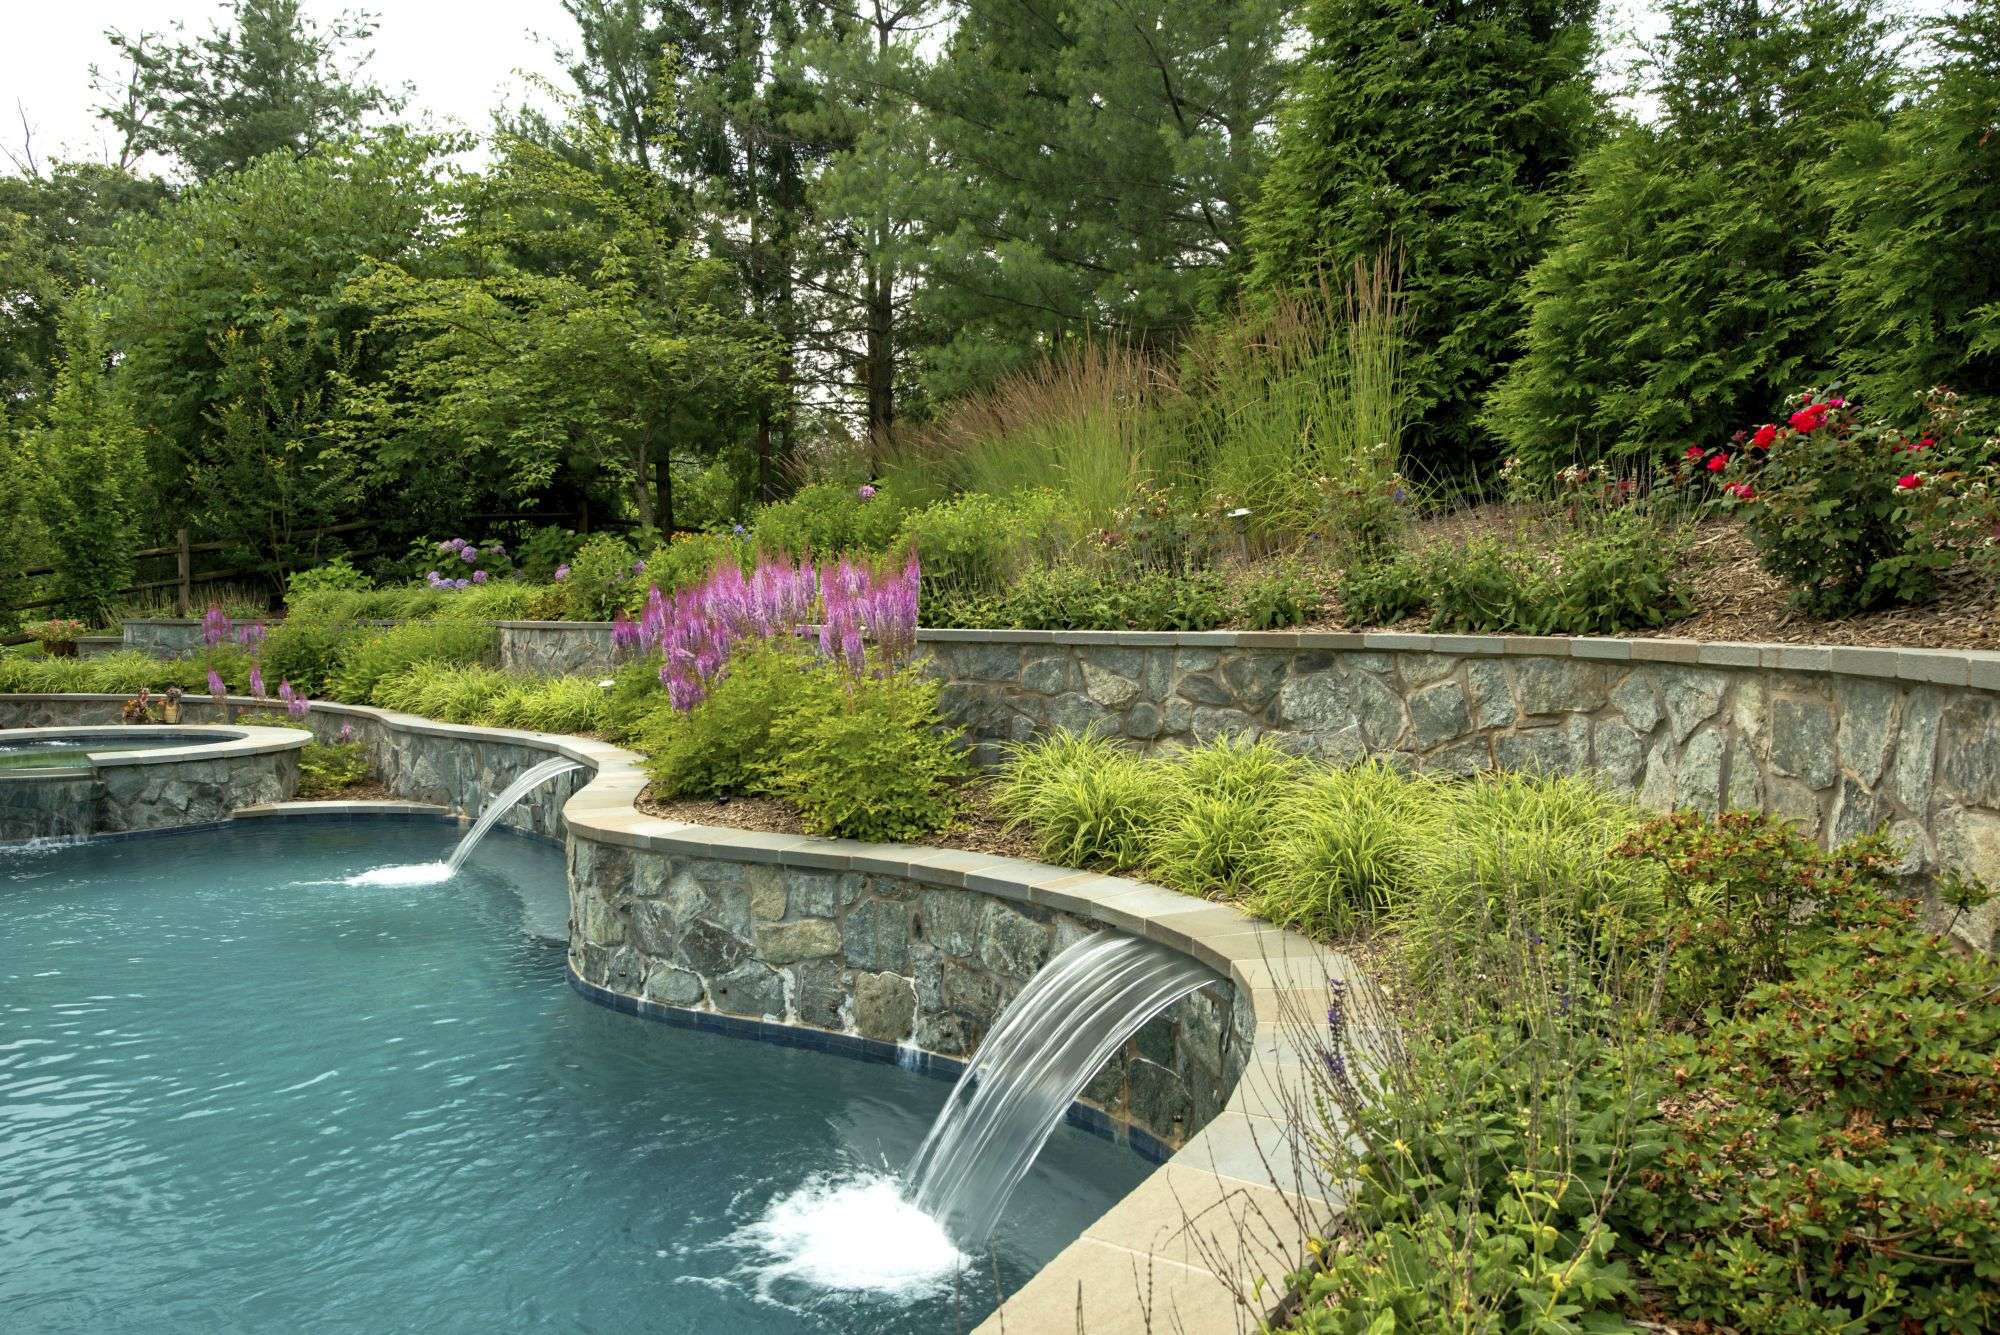 Pool with berm and privacy plantings